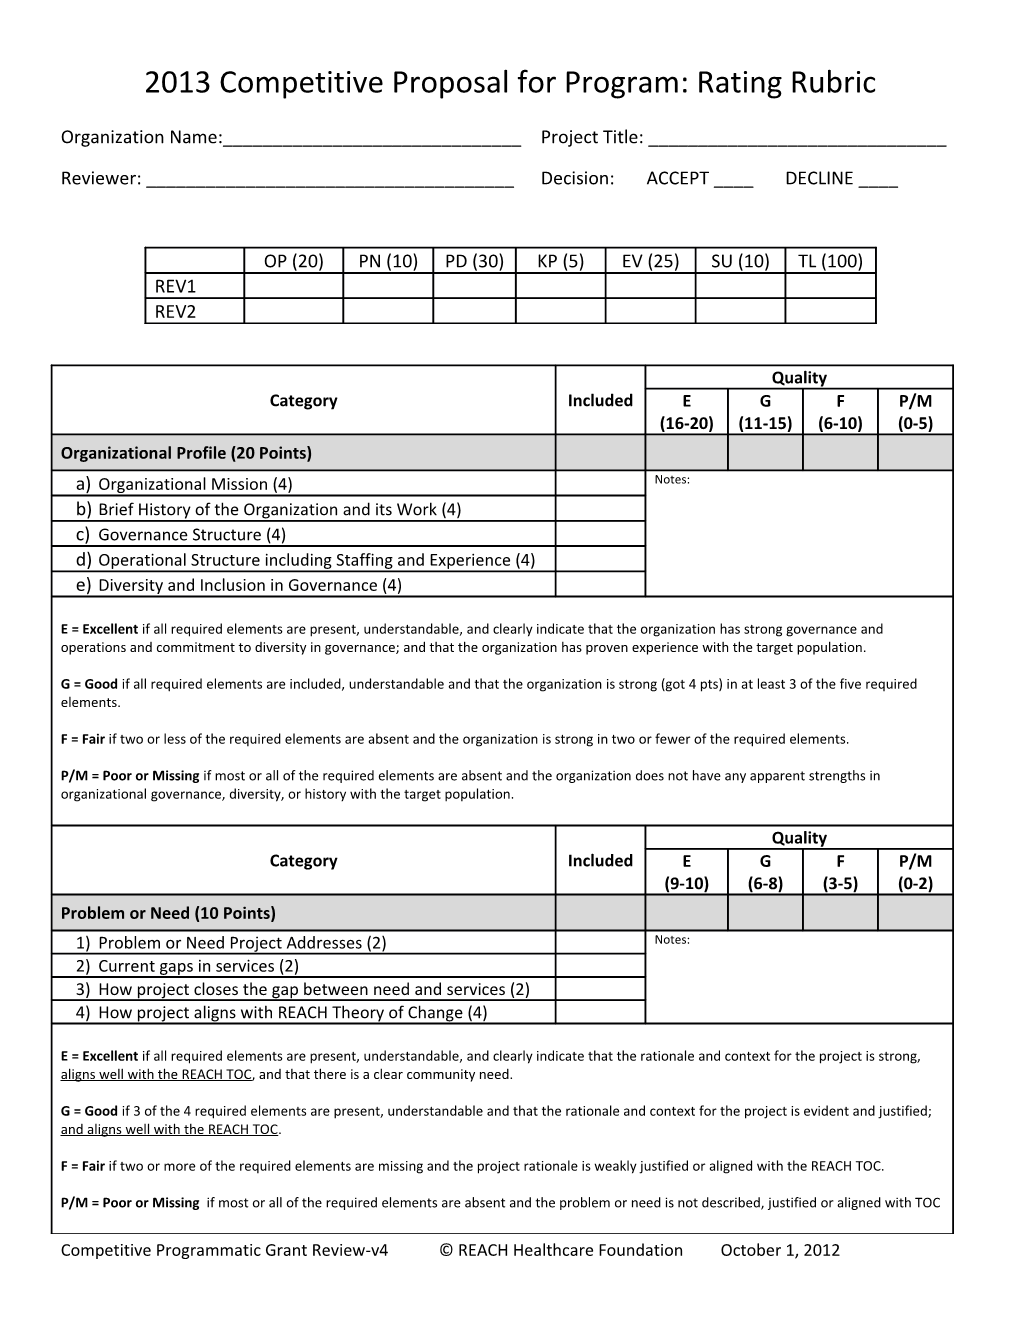 2013 Competitive Proposal for Program: Rating Rubric